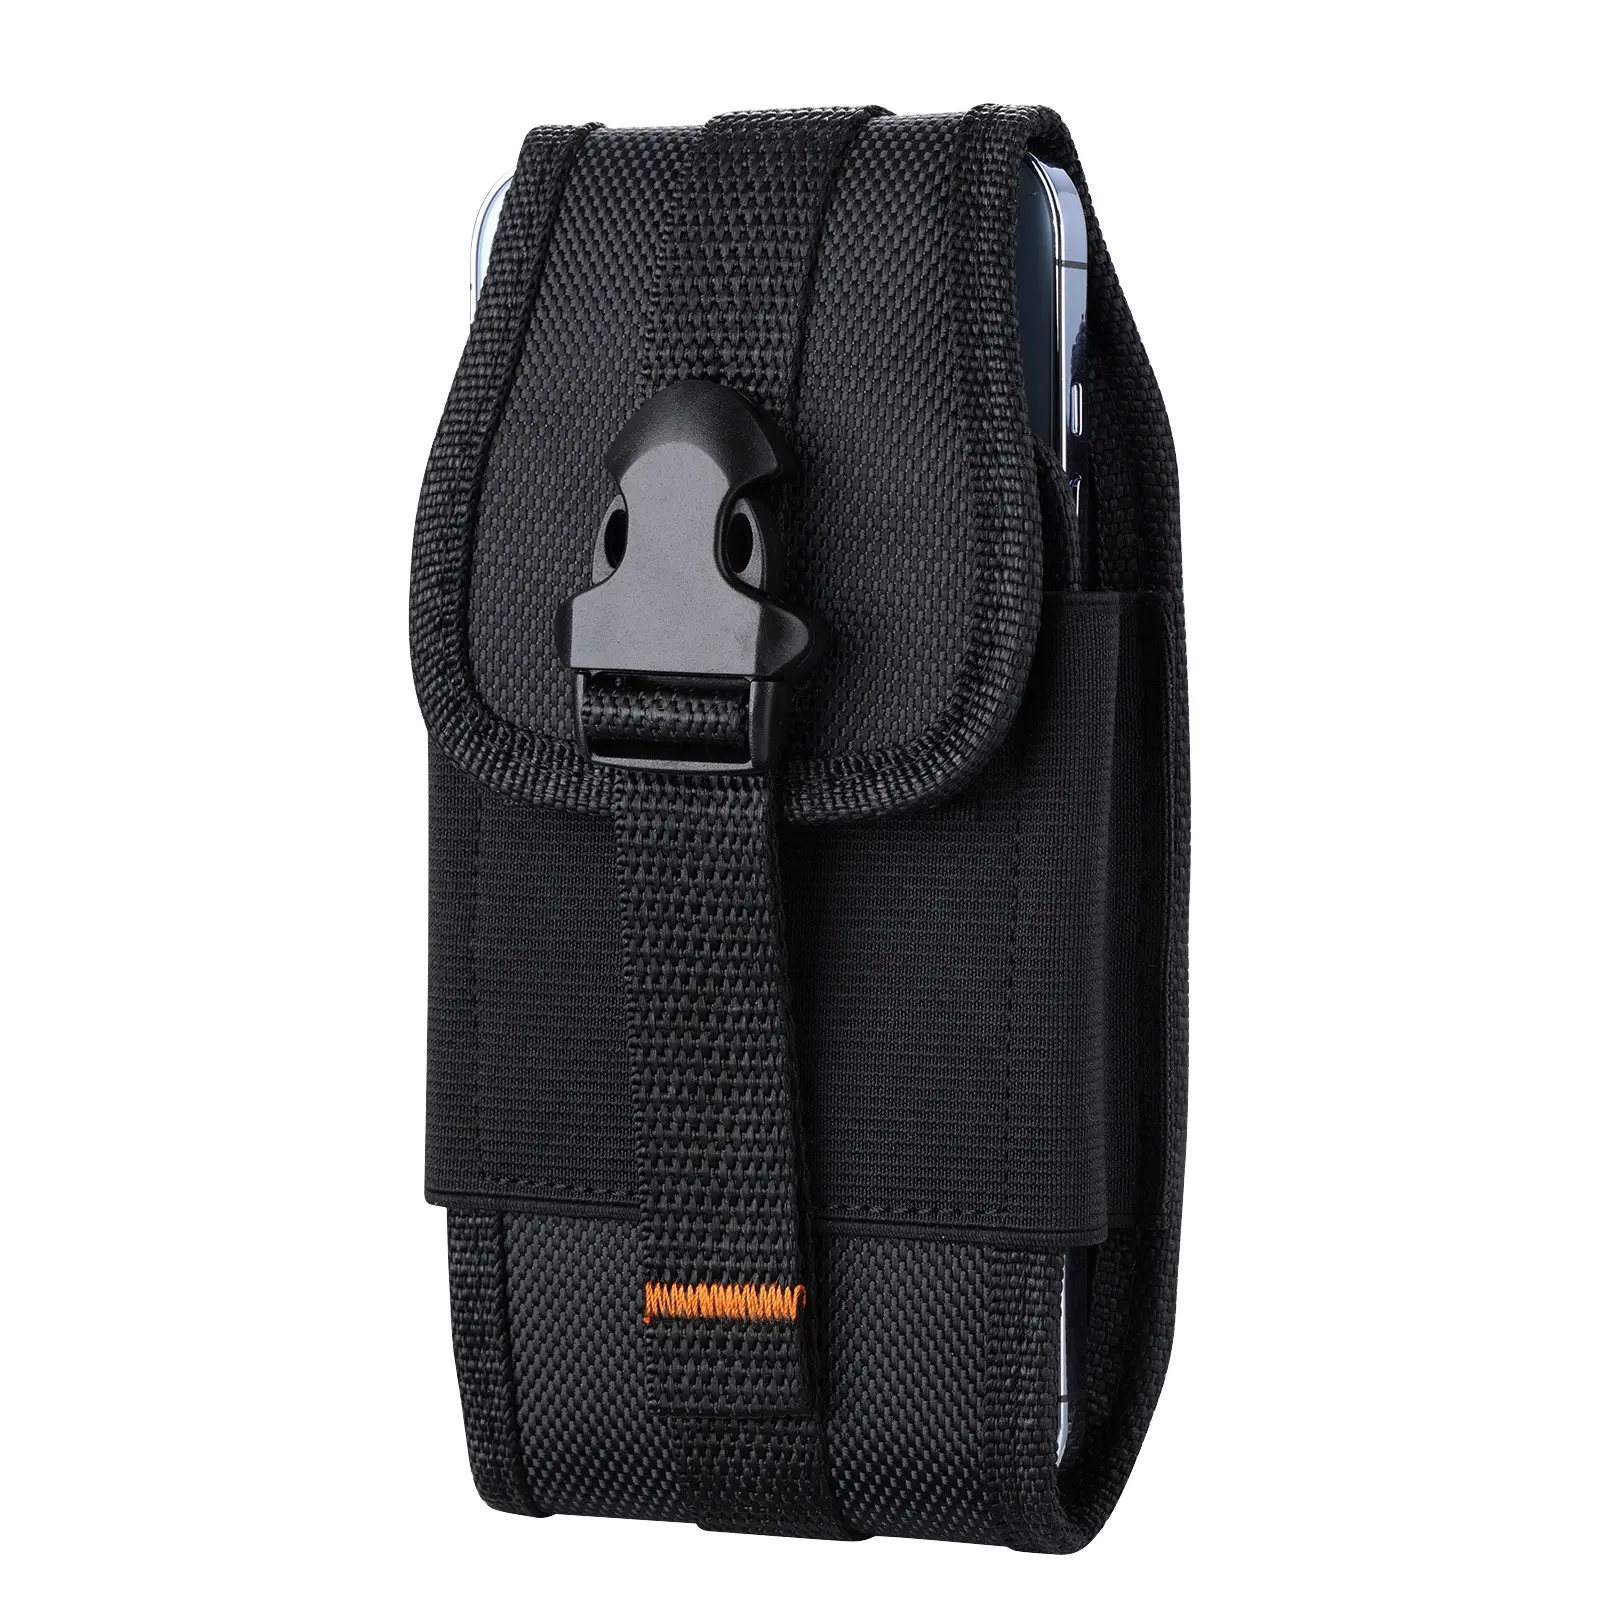 Nylon Canvas Phone Holster Holder, Phone Belt Pouch Swivel Clip Phone Holster for Android Moto for Samsung LG Google iPhone 11